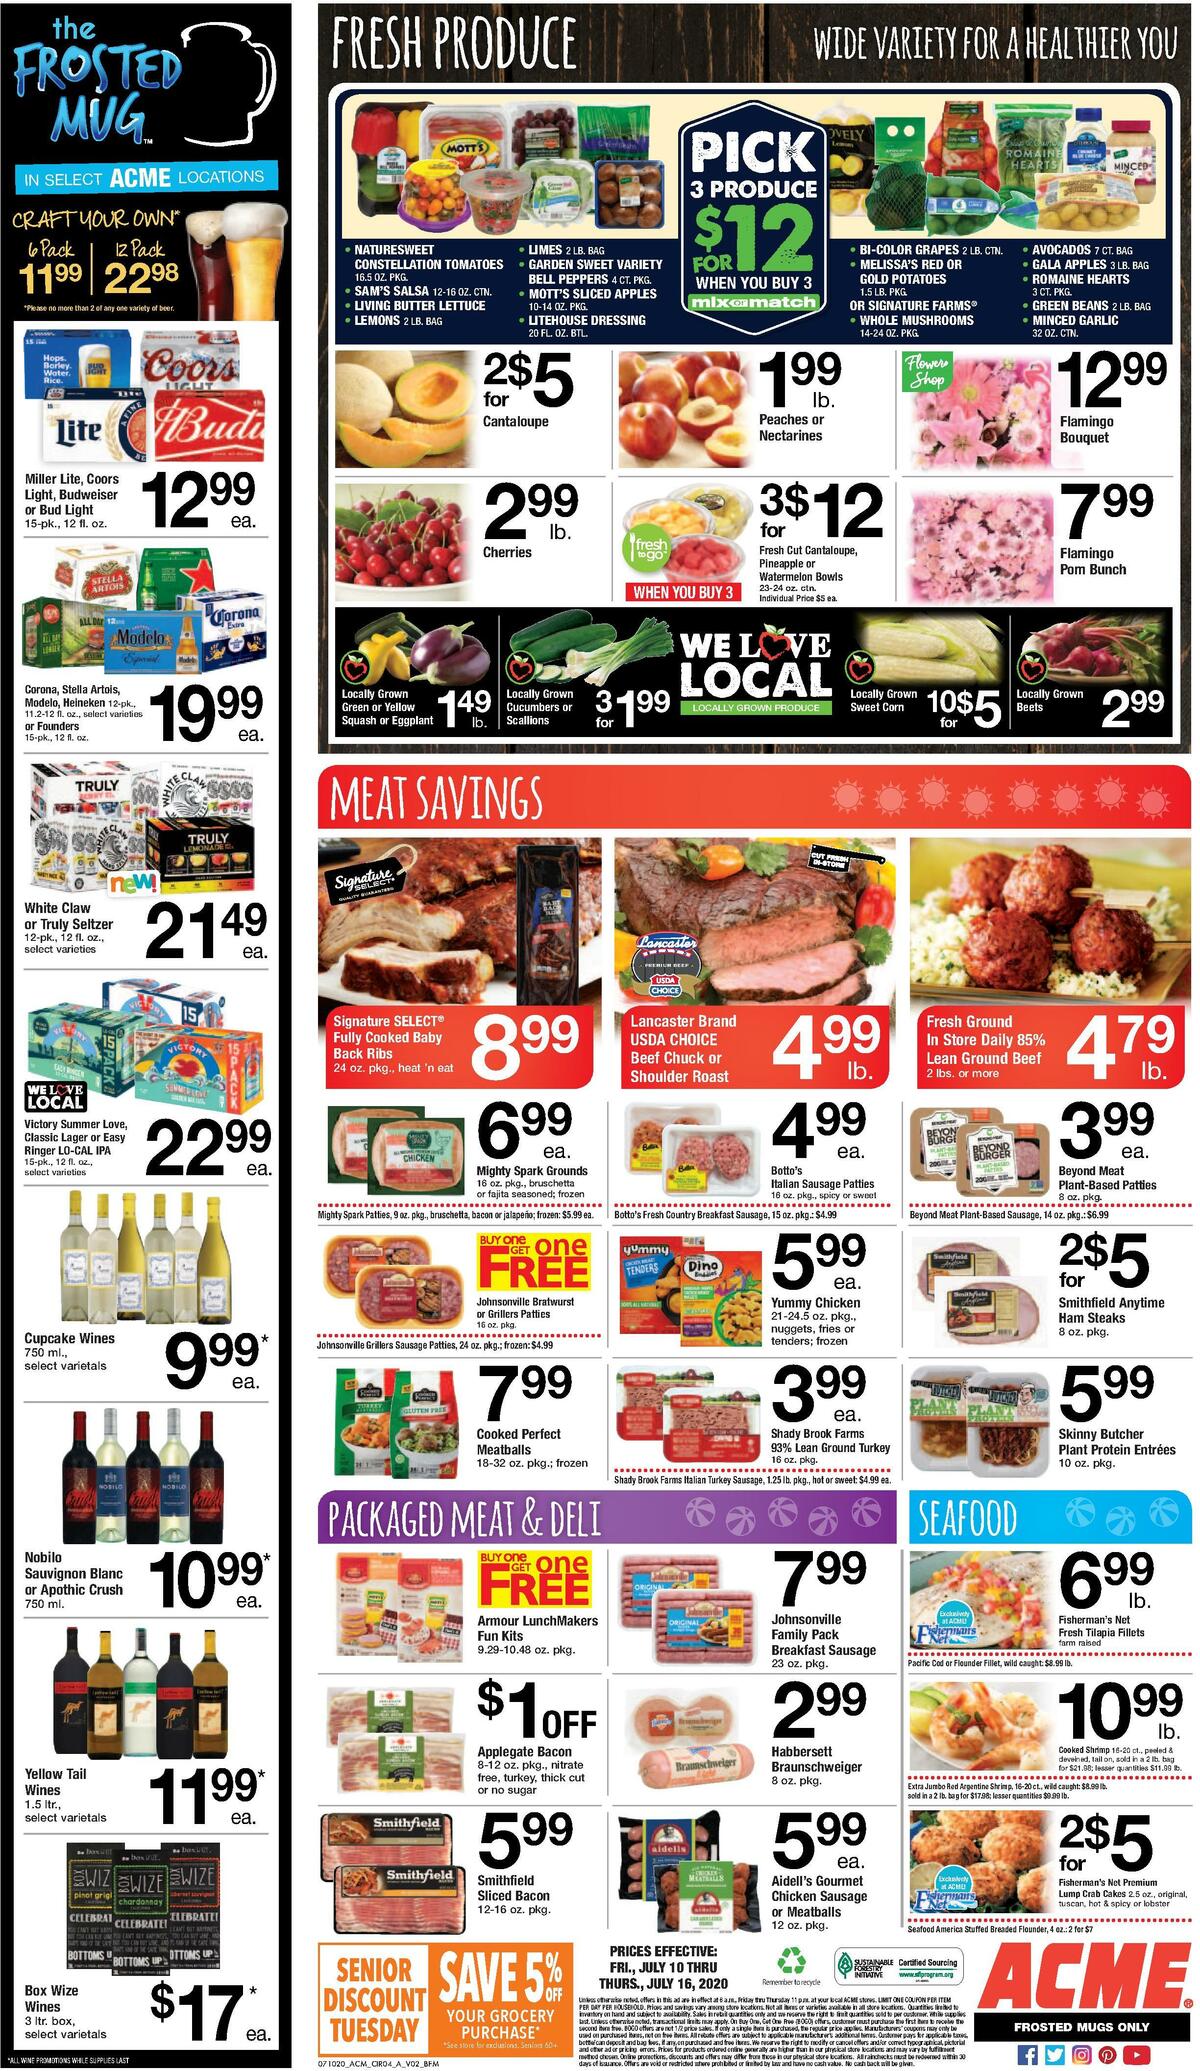 ACME Markets Weekly Ad from July 10